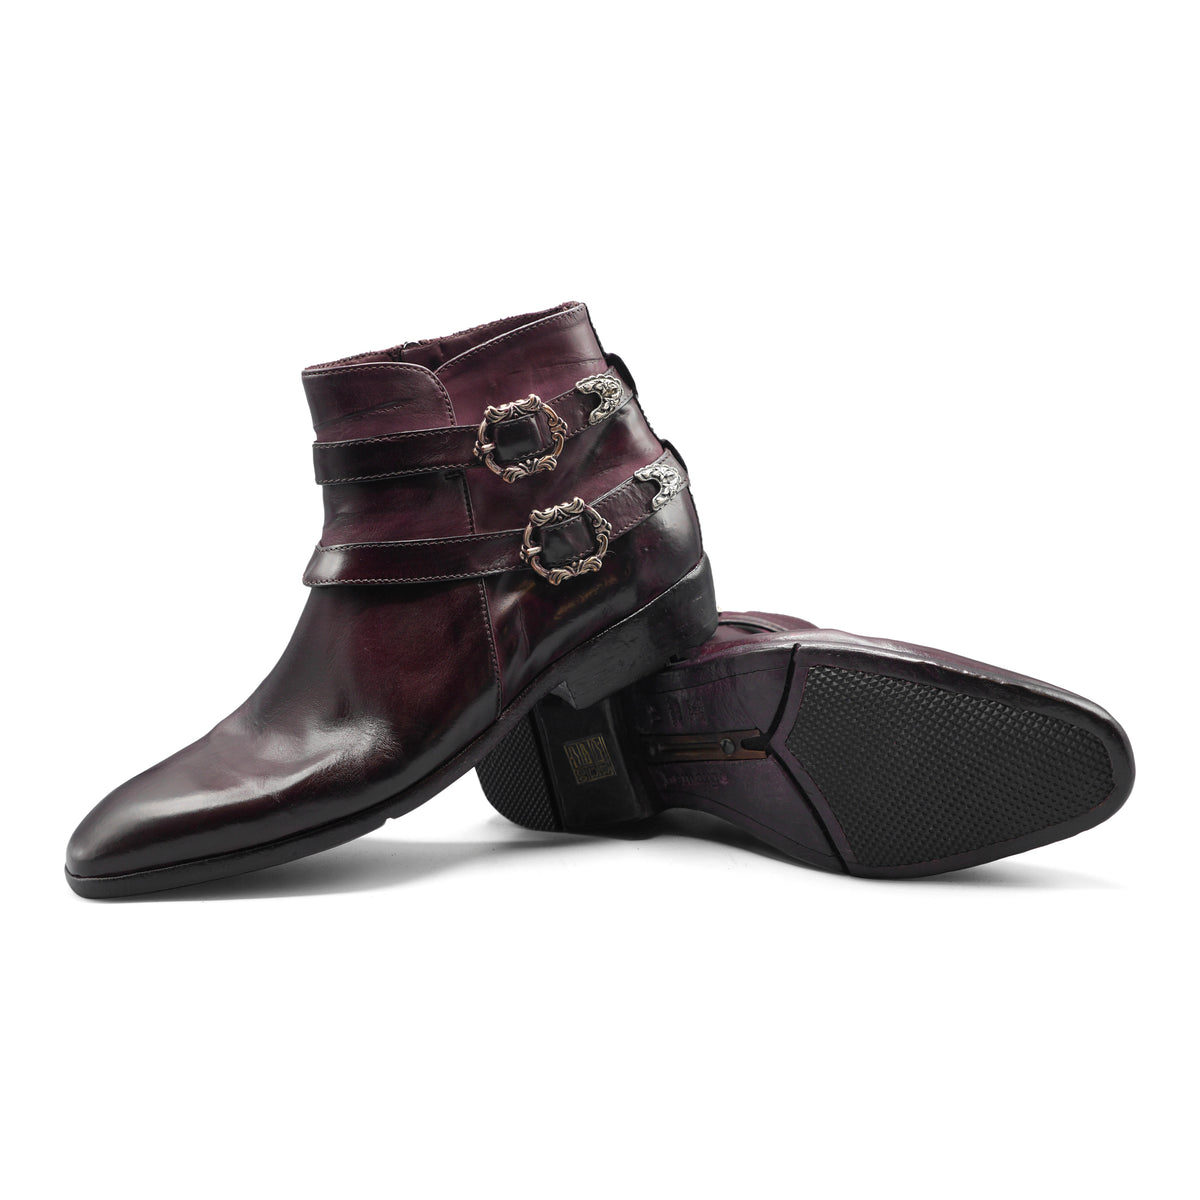 FLOR3B - Burgundy Double Strap Ankle Boot